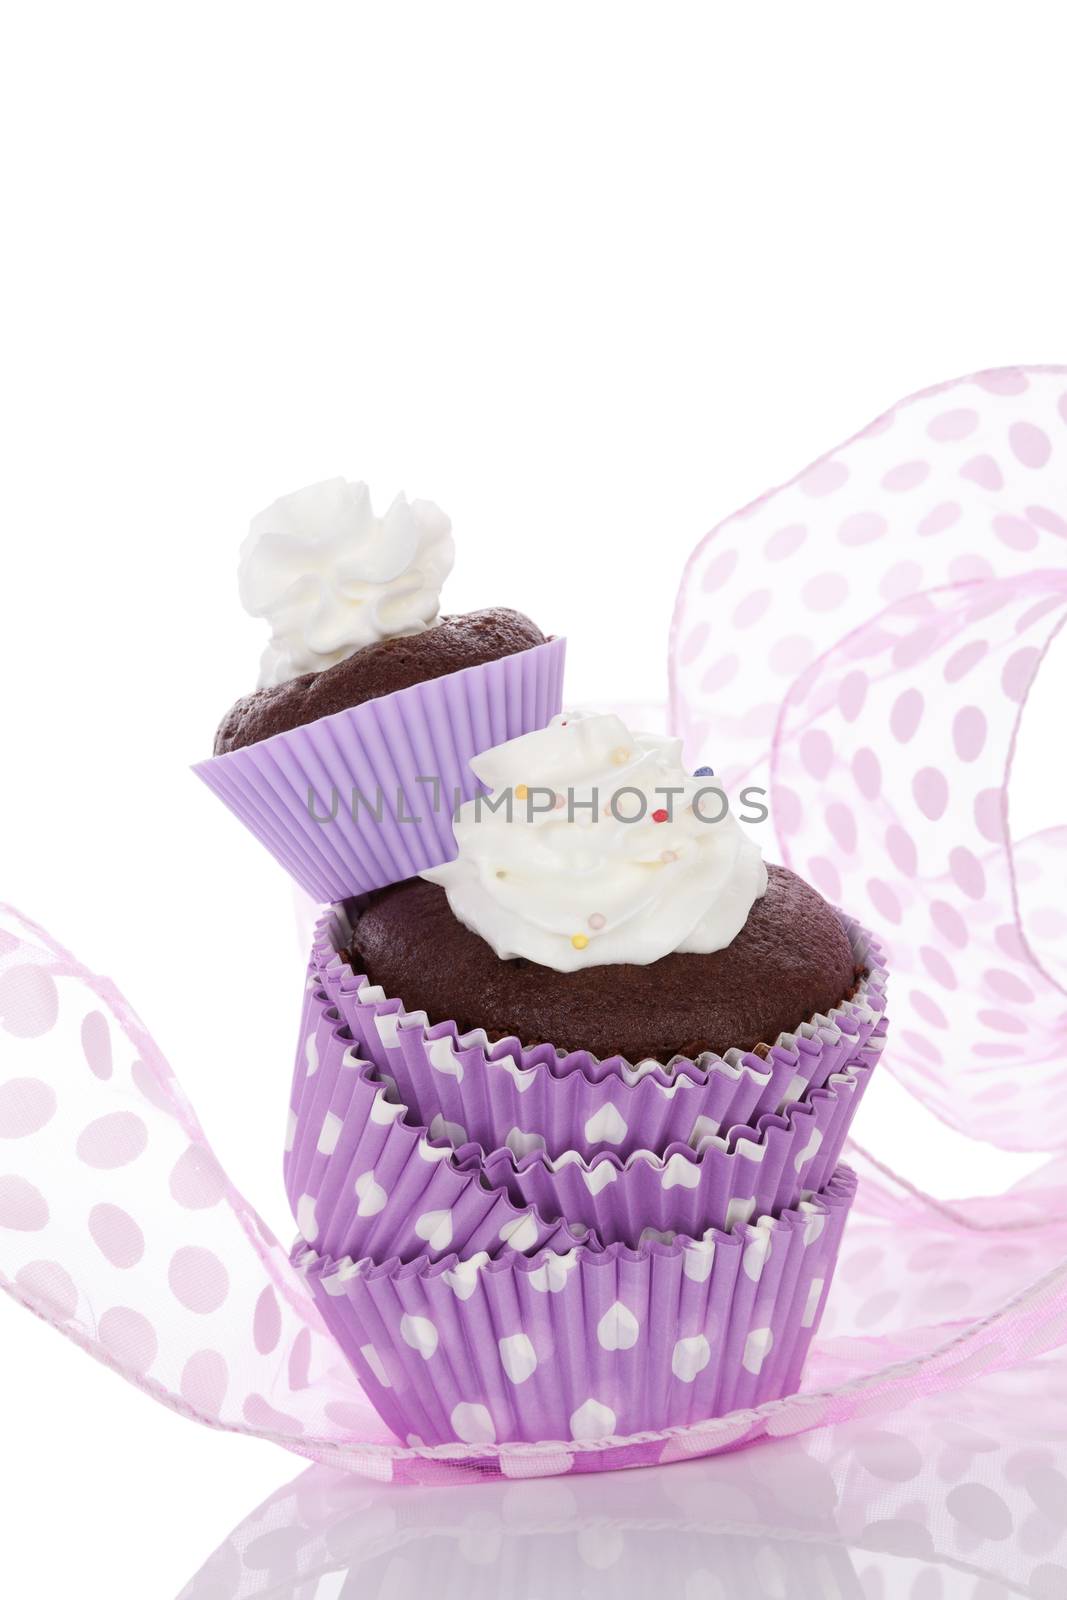 Delicious chocolate cupcake with whipped cream in purple dotted paper form isolated on white. Cupcakes baking.